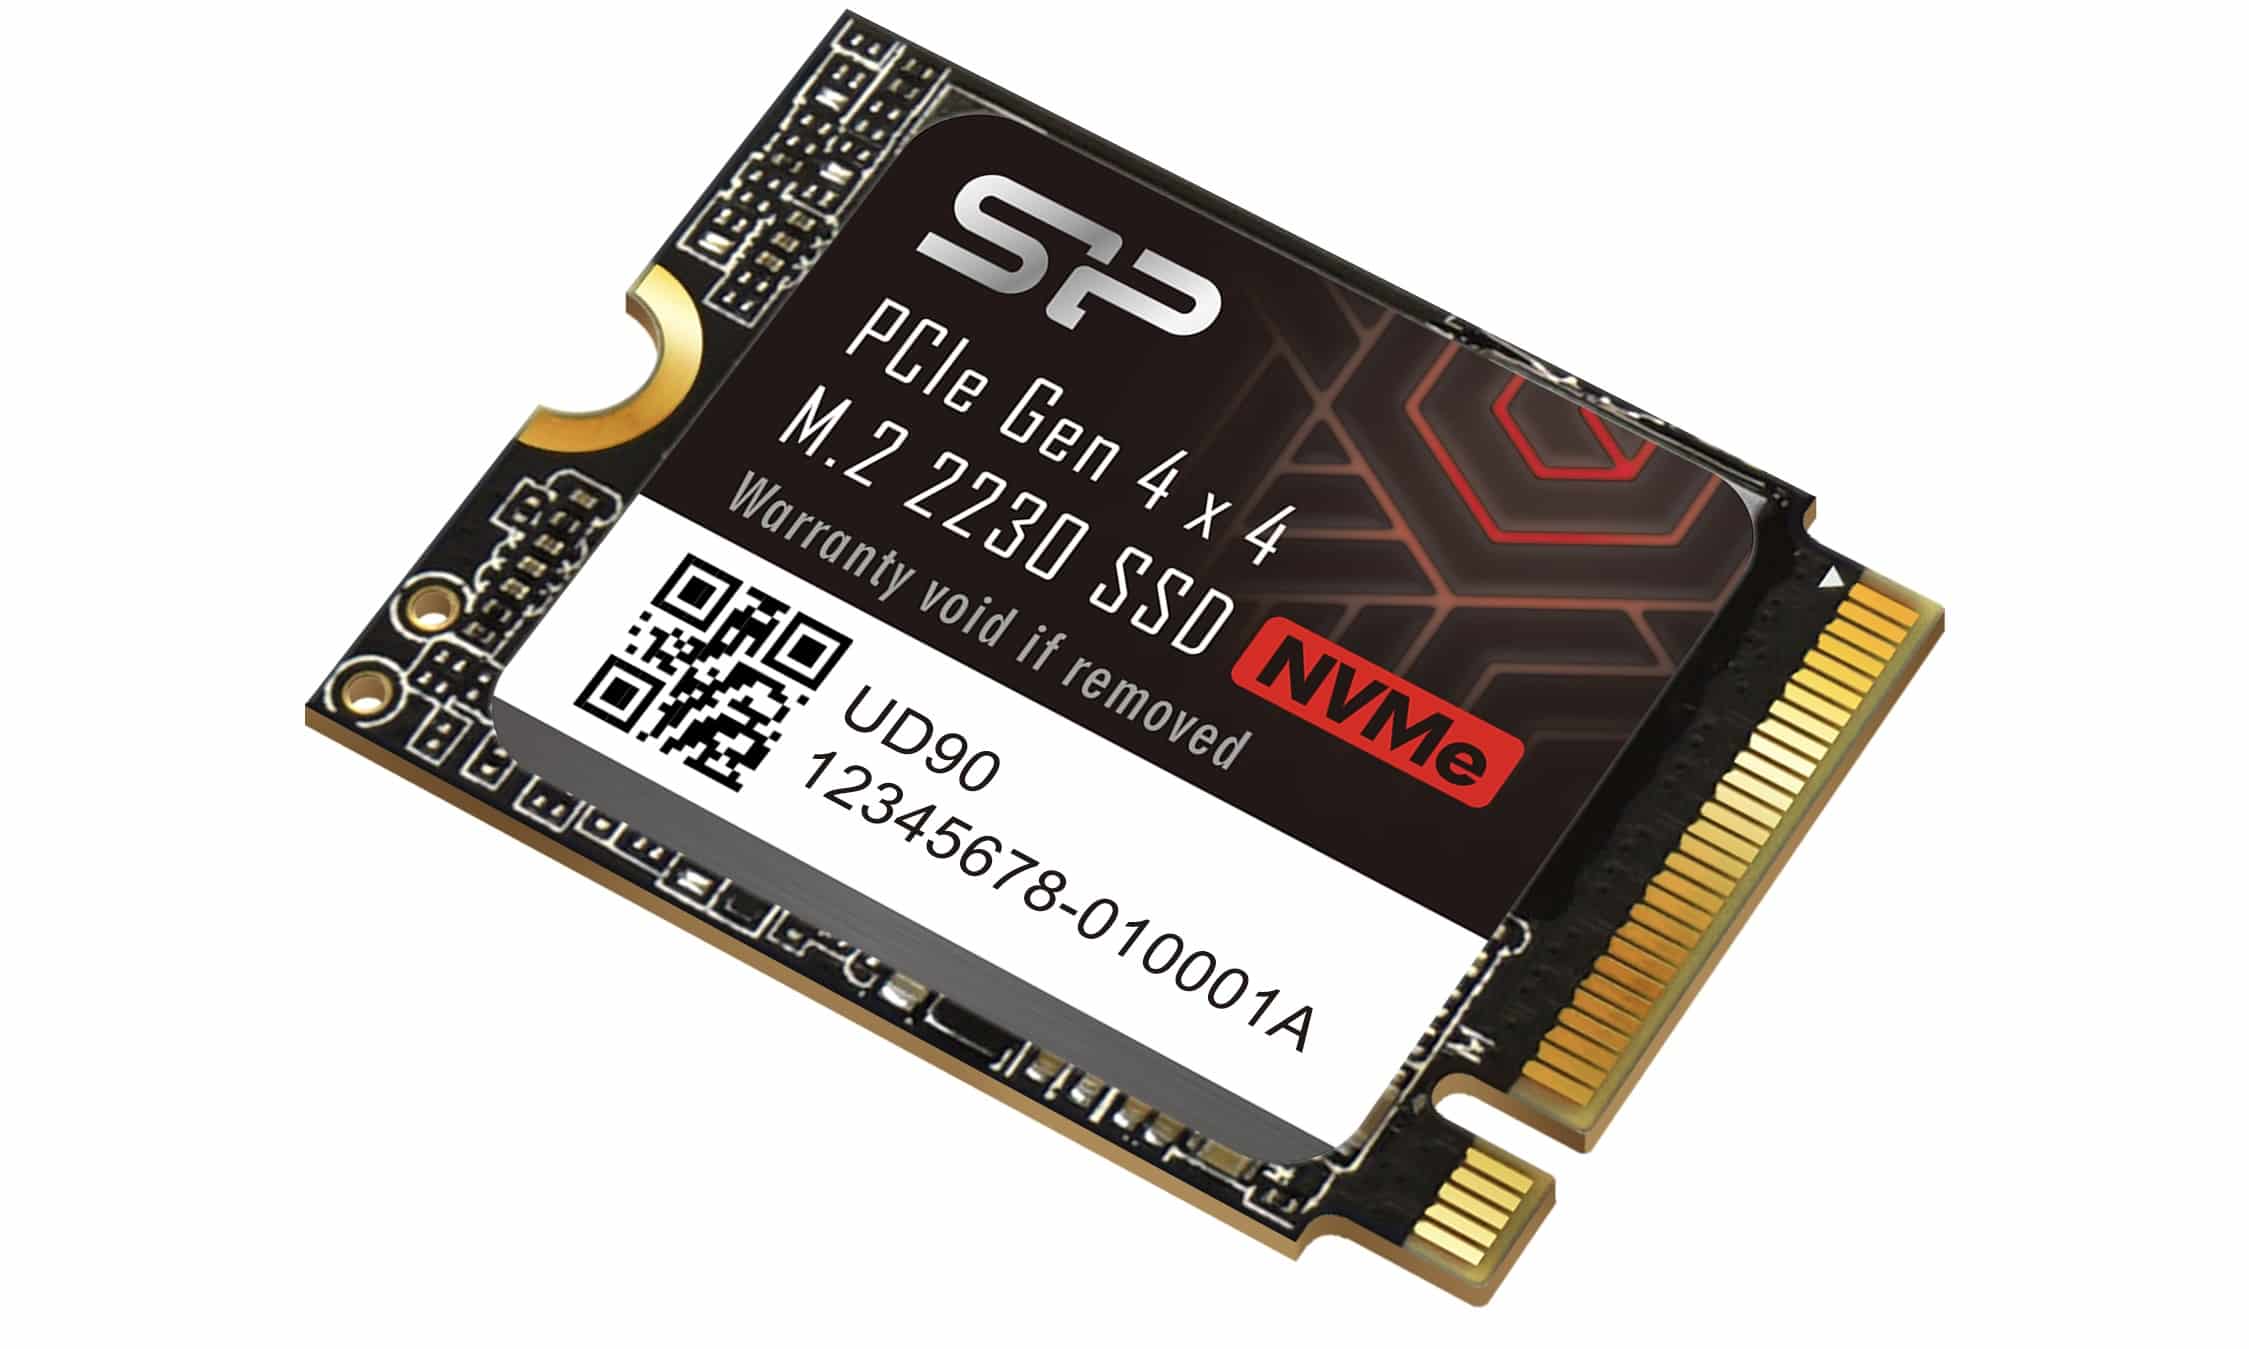 Silicon Power UD90 M.2 2230 NVMe SSD is designed for portable